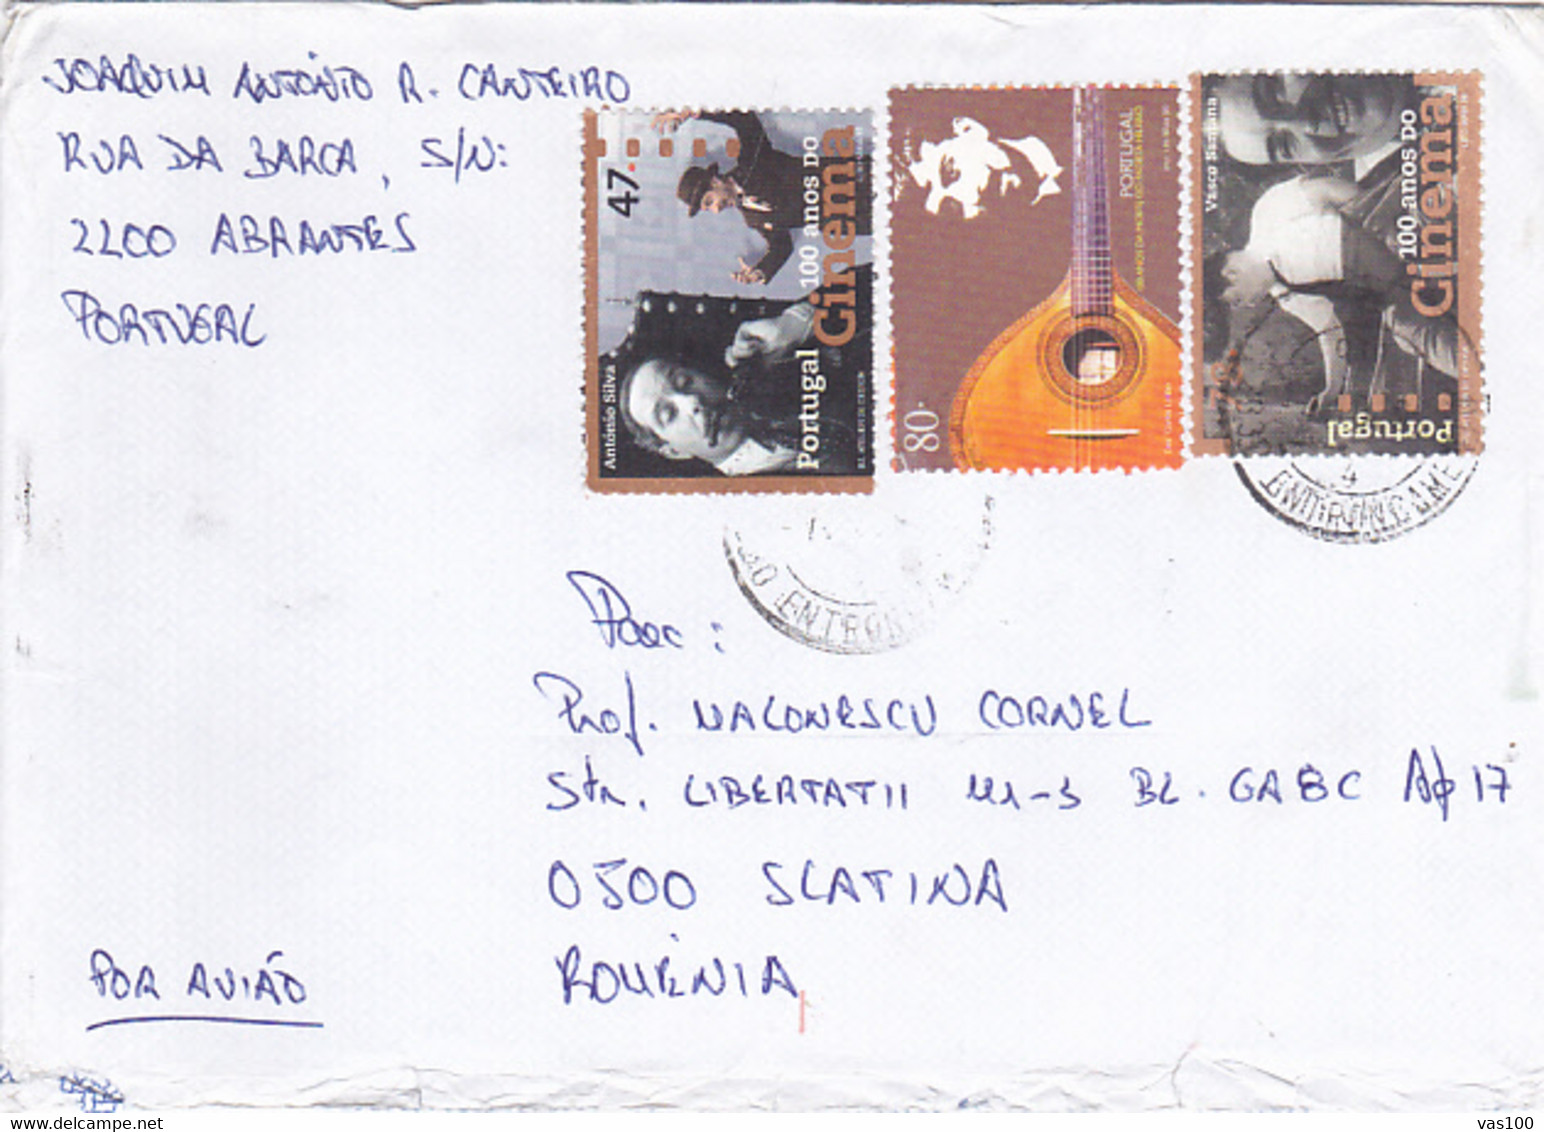 CINEMA, AUGUSTO HILARIO, STAMPS ON COVER, 1996, PORTUGAL - Covers & Documents